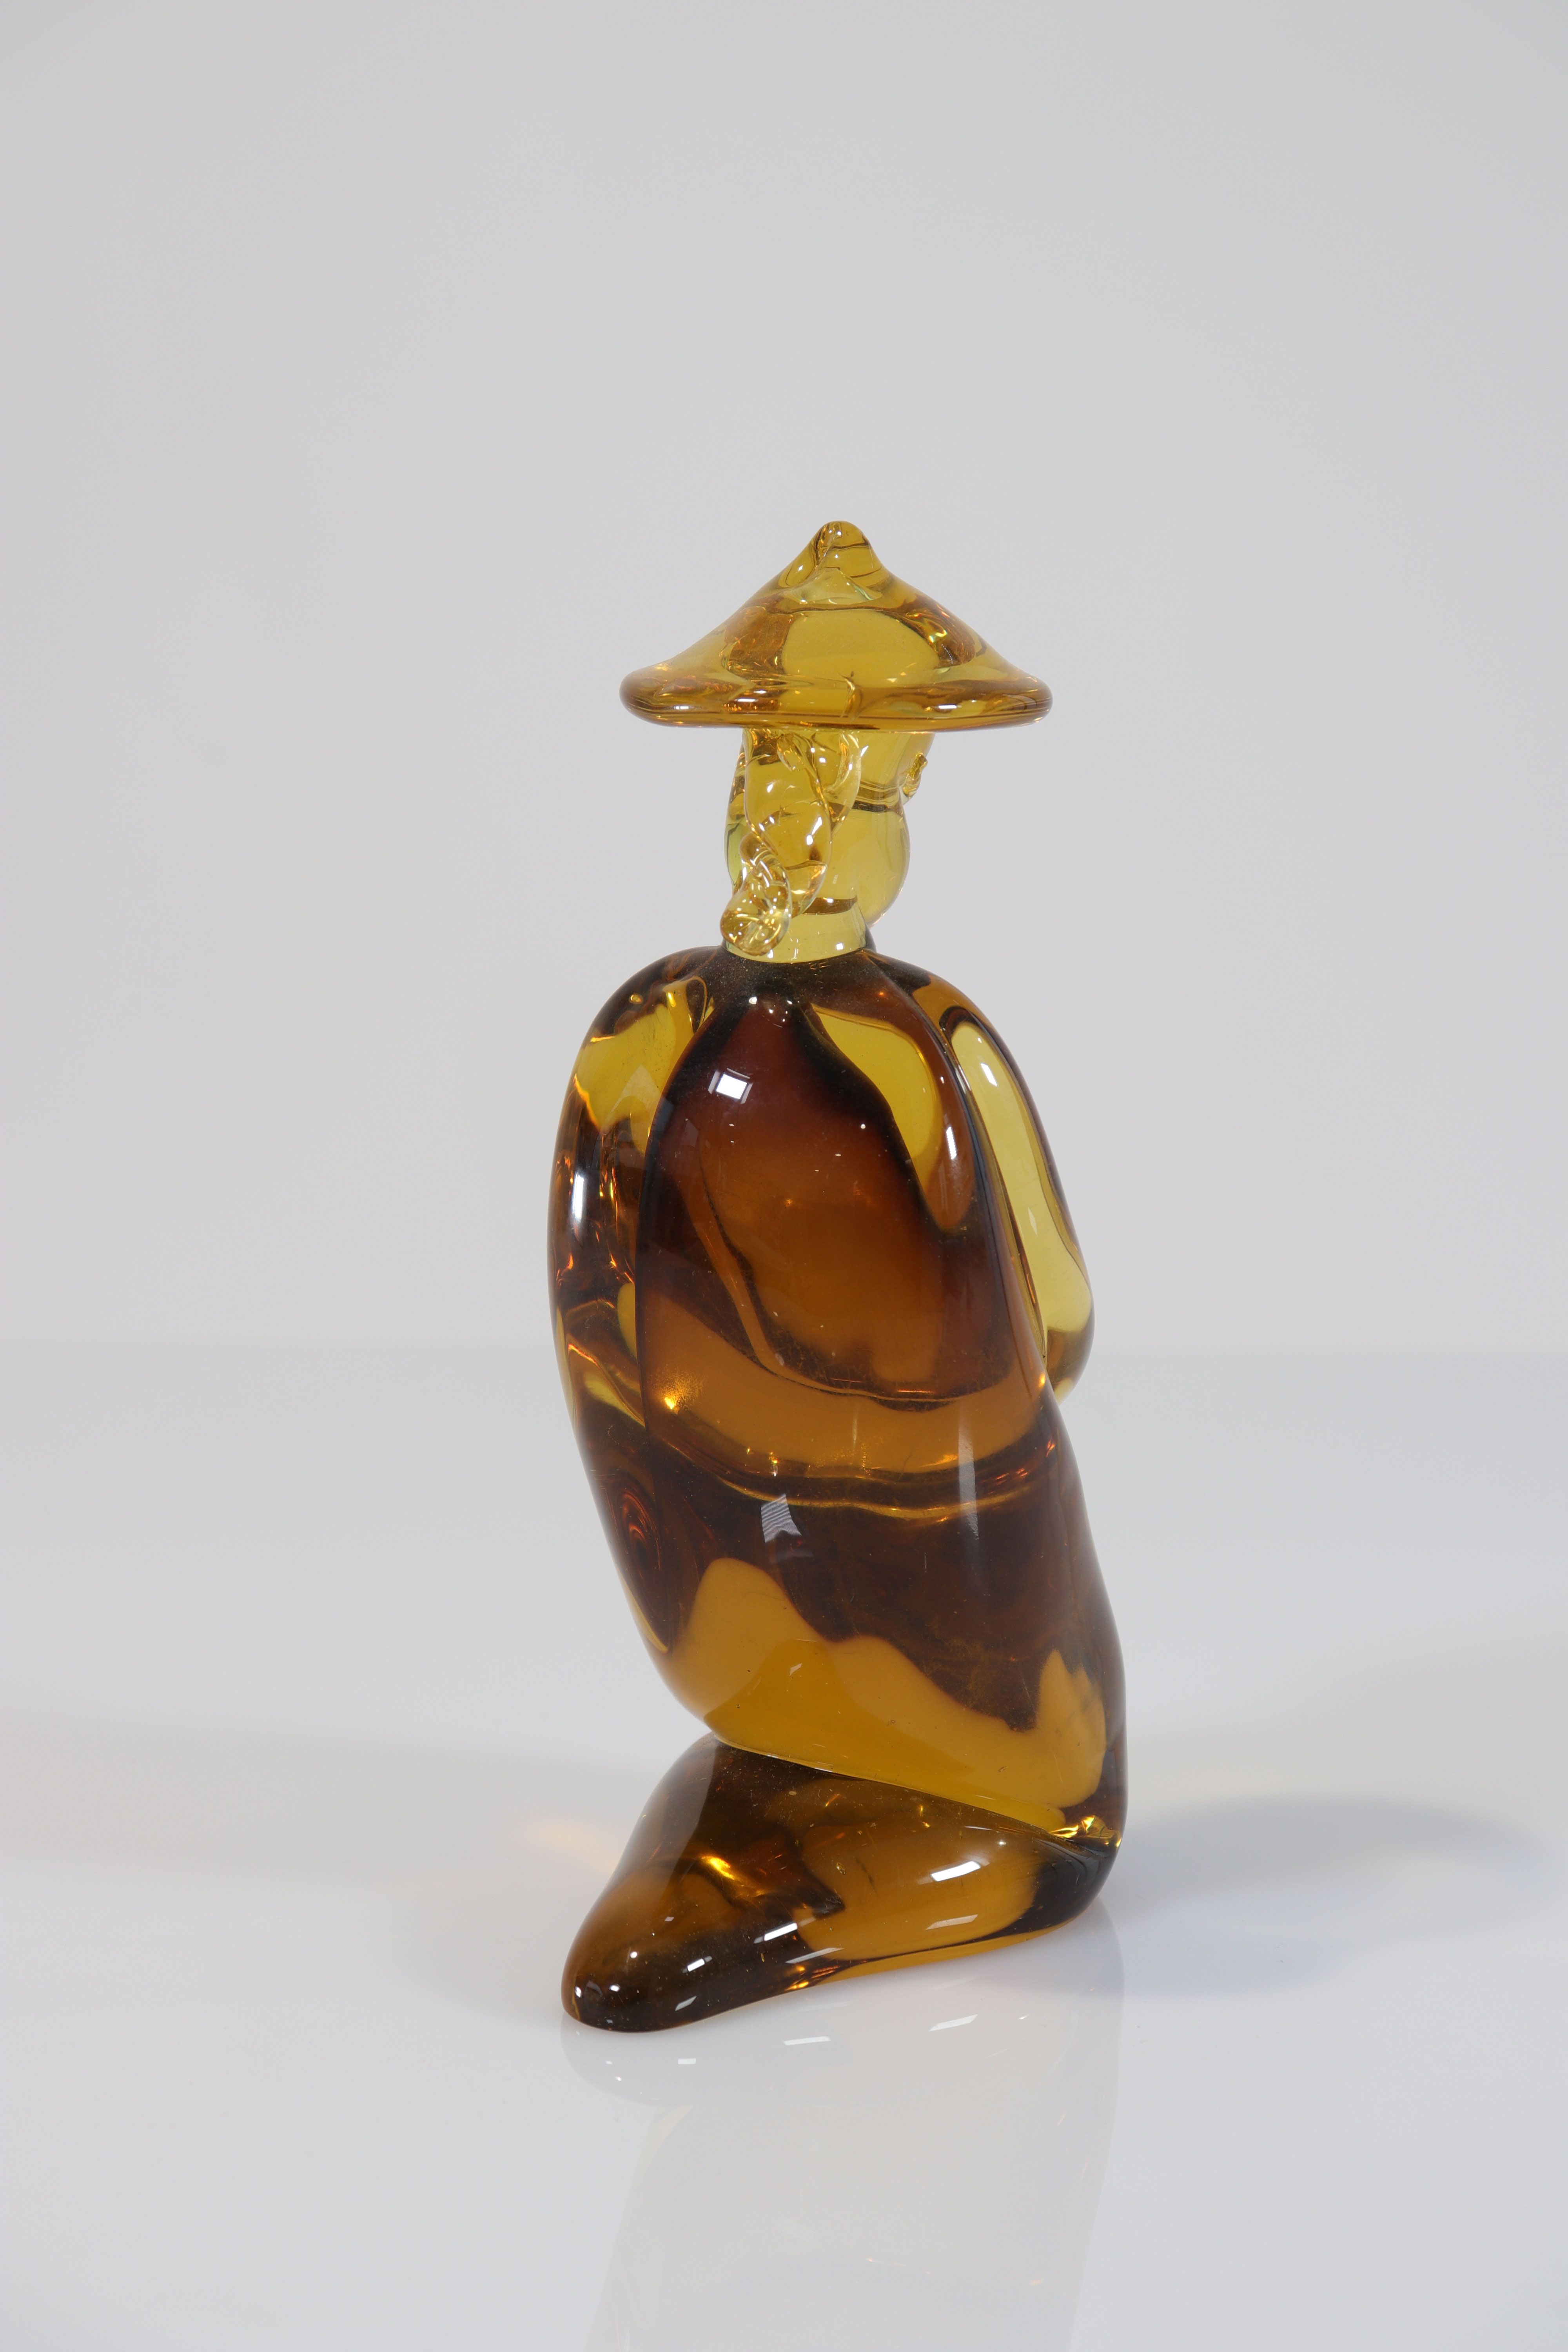 Italy - Merano, yellow glass sculpture, depicting a Chinese - 1960 - Image 4 of 4